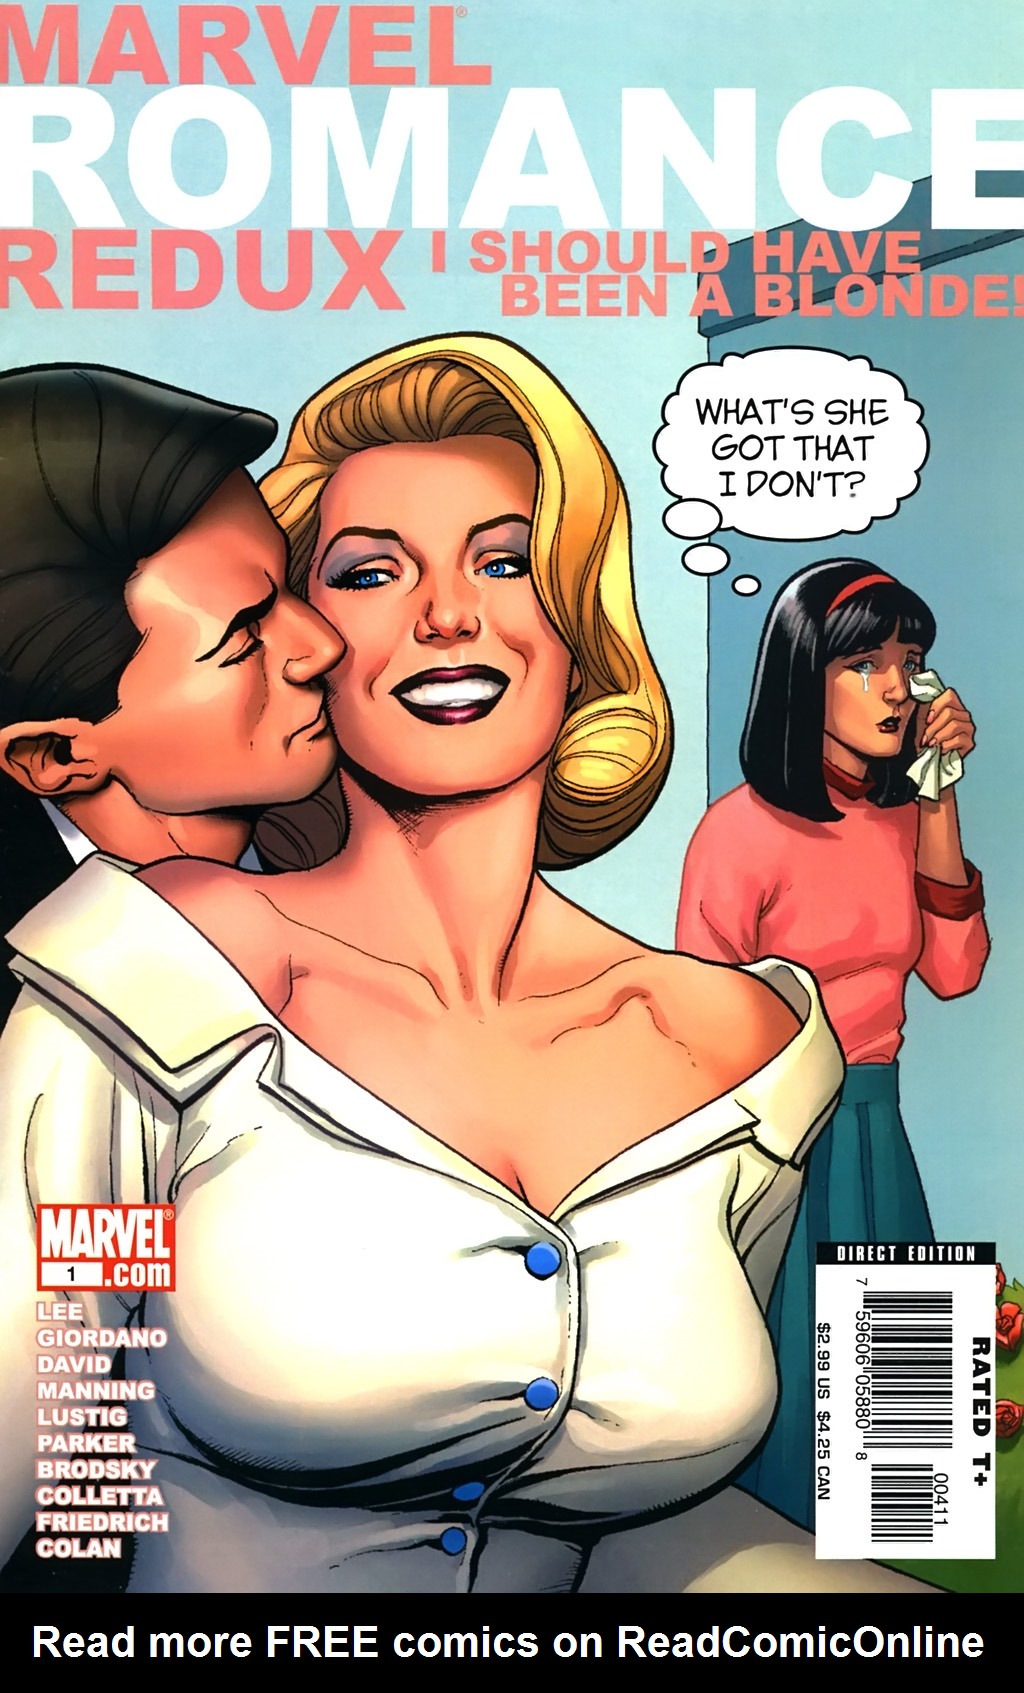 Read online Marvel Romance Redux comic -  Issue # I Should Have Been a Blonde - 1